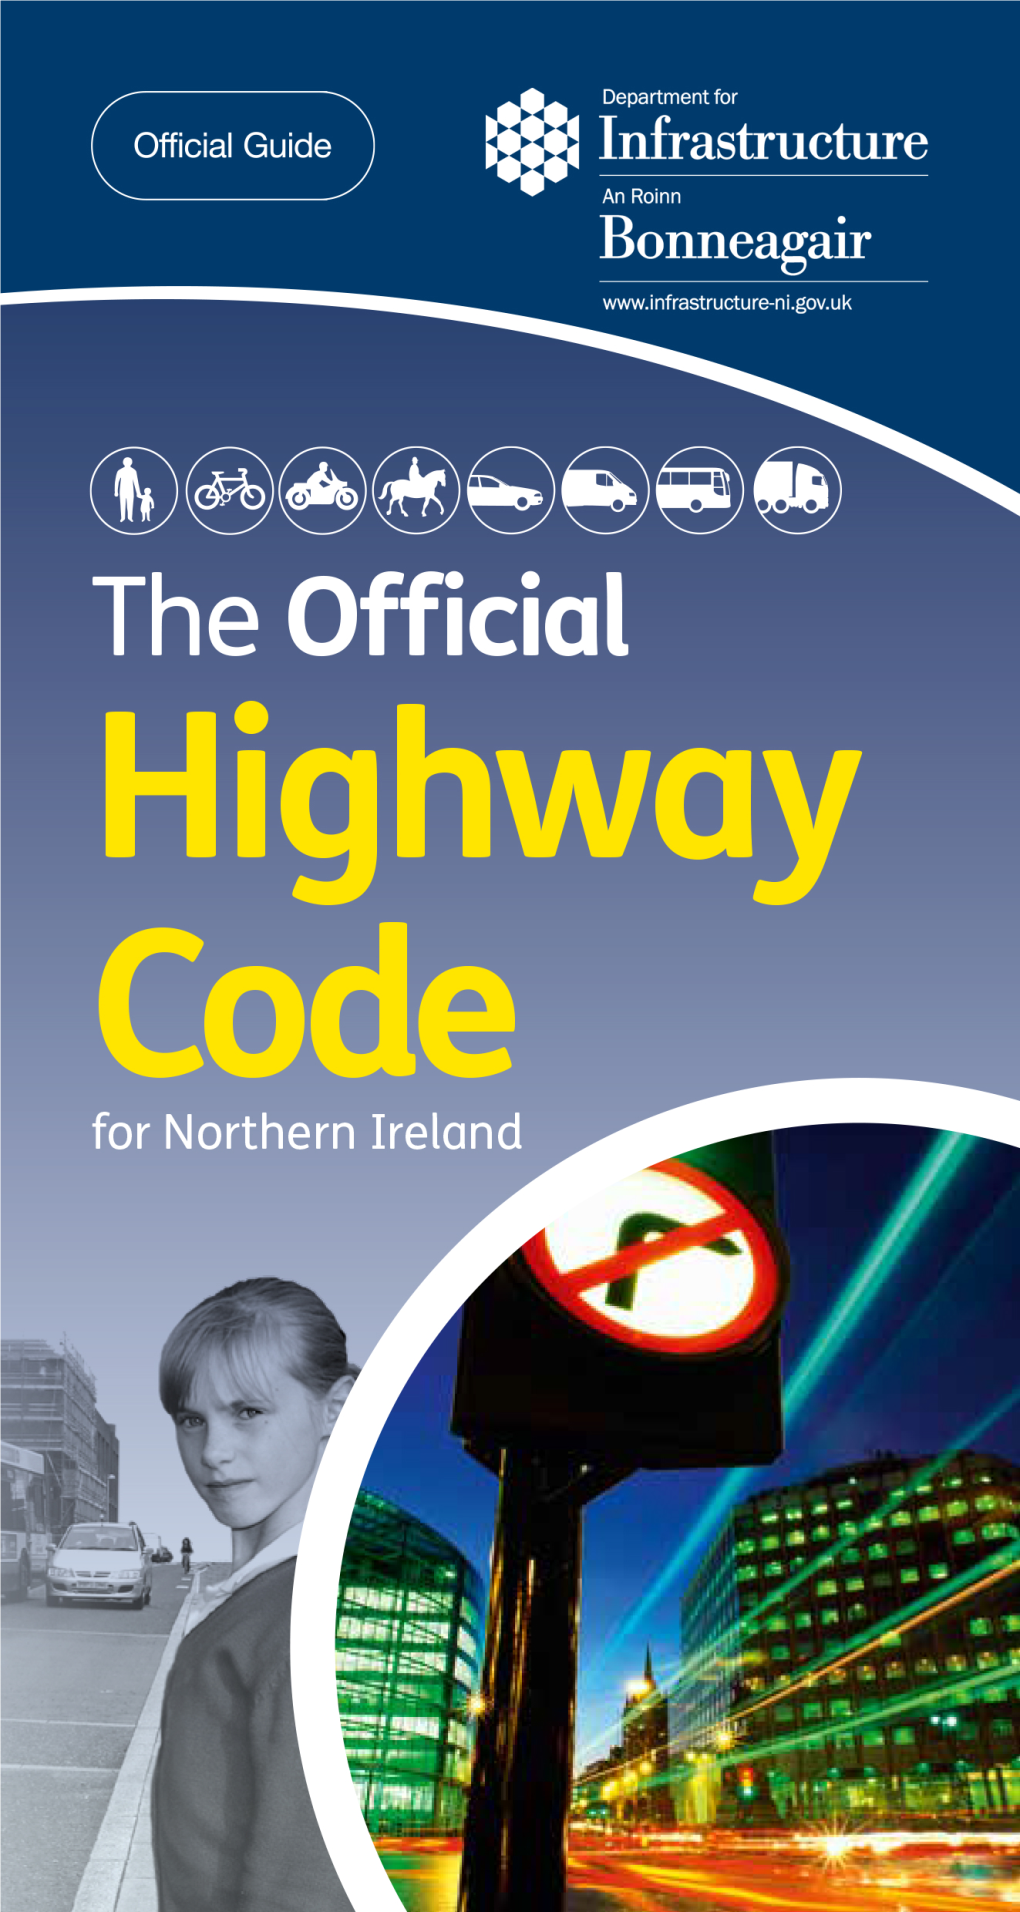 The Official Highway Code for Northern Ireland